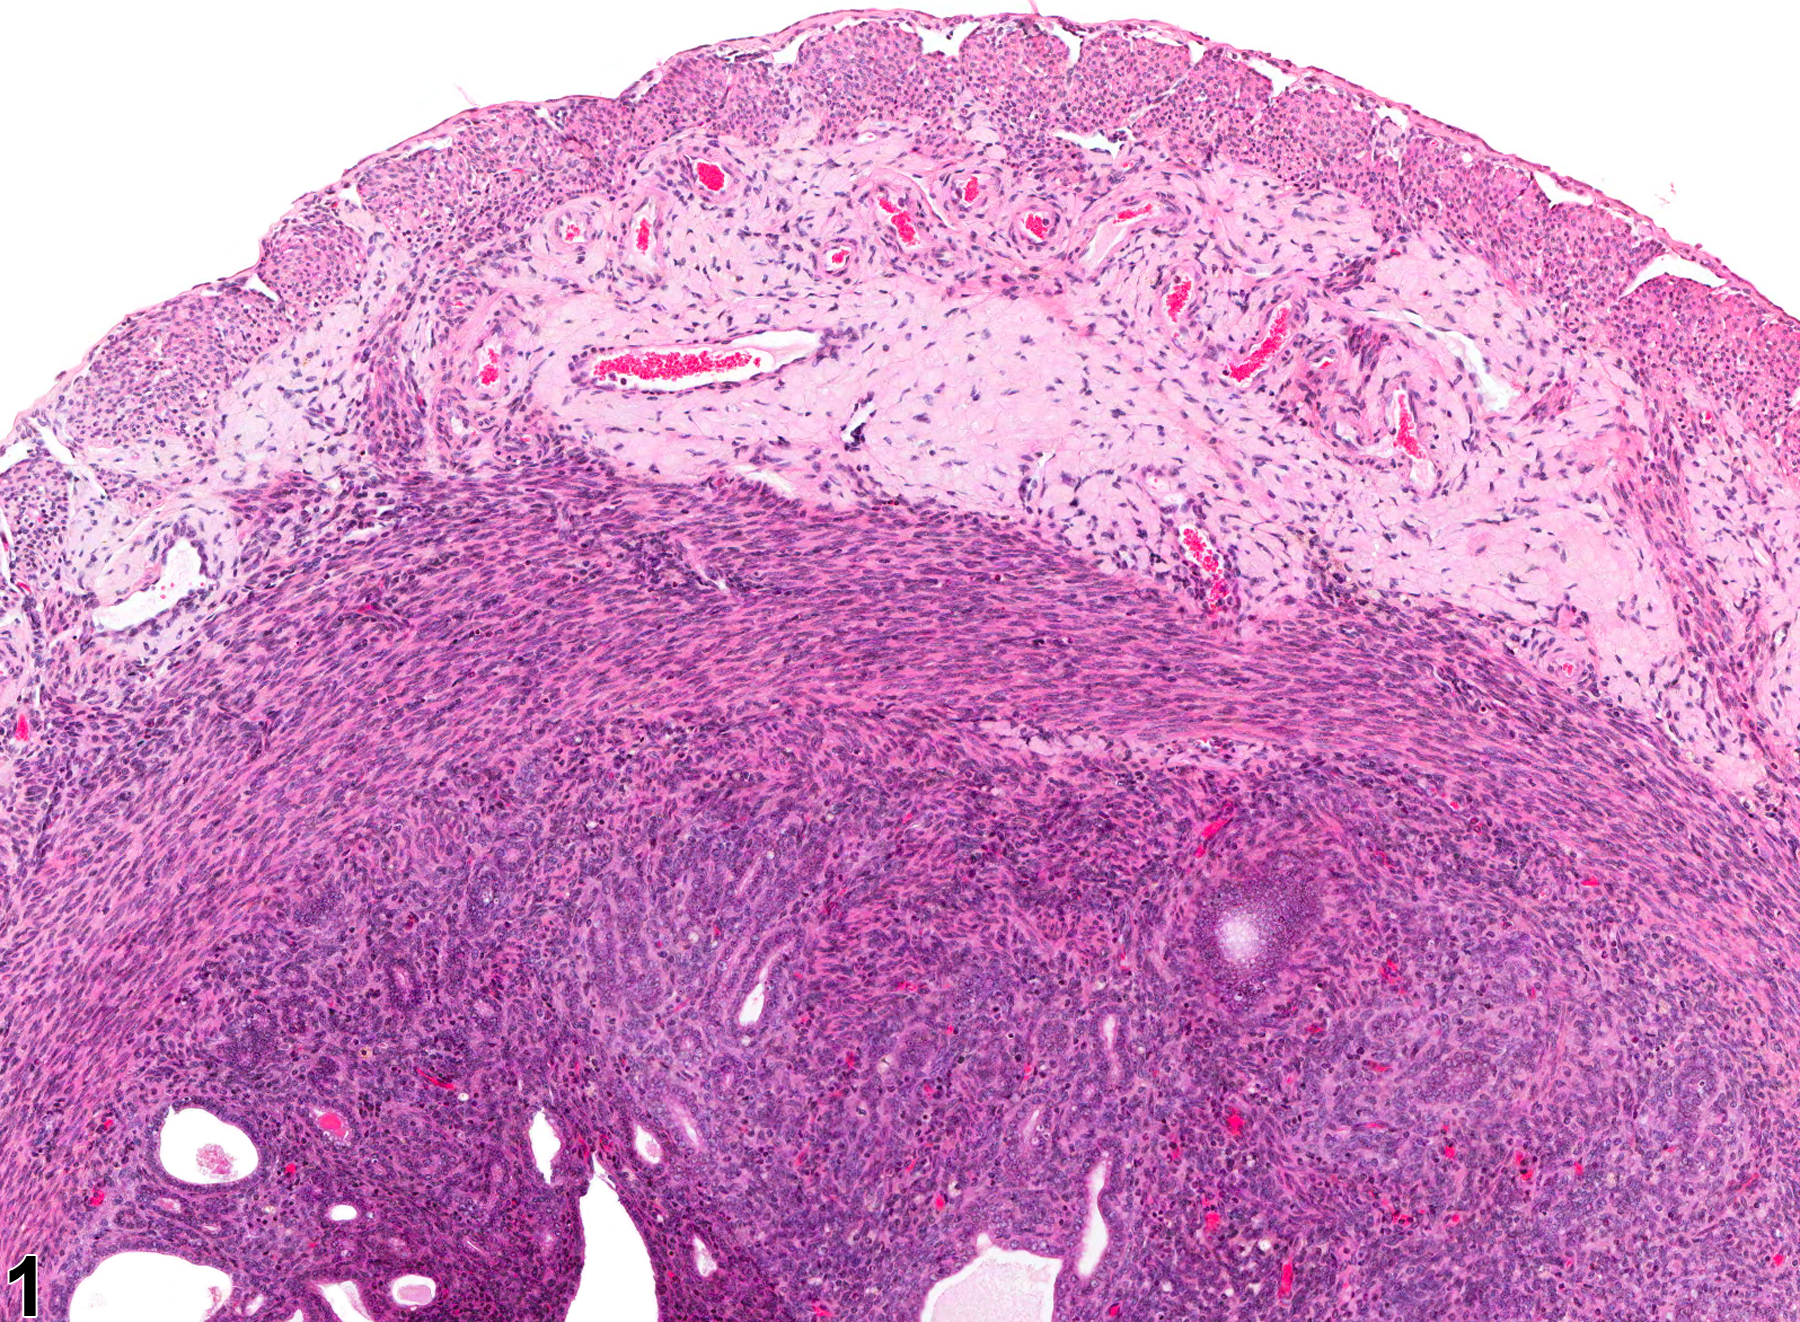 Image of amyloid in the uterus from a female Swiss Webster mouse in a chronic study